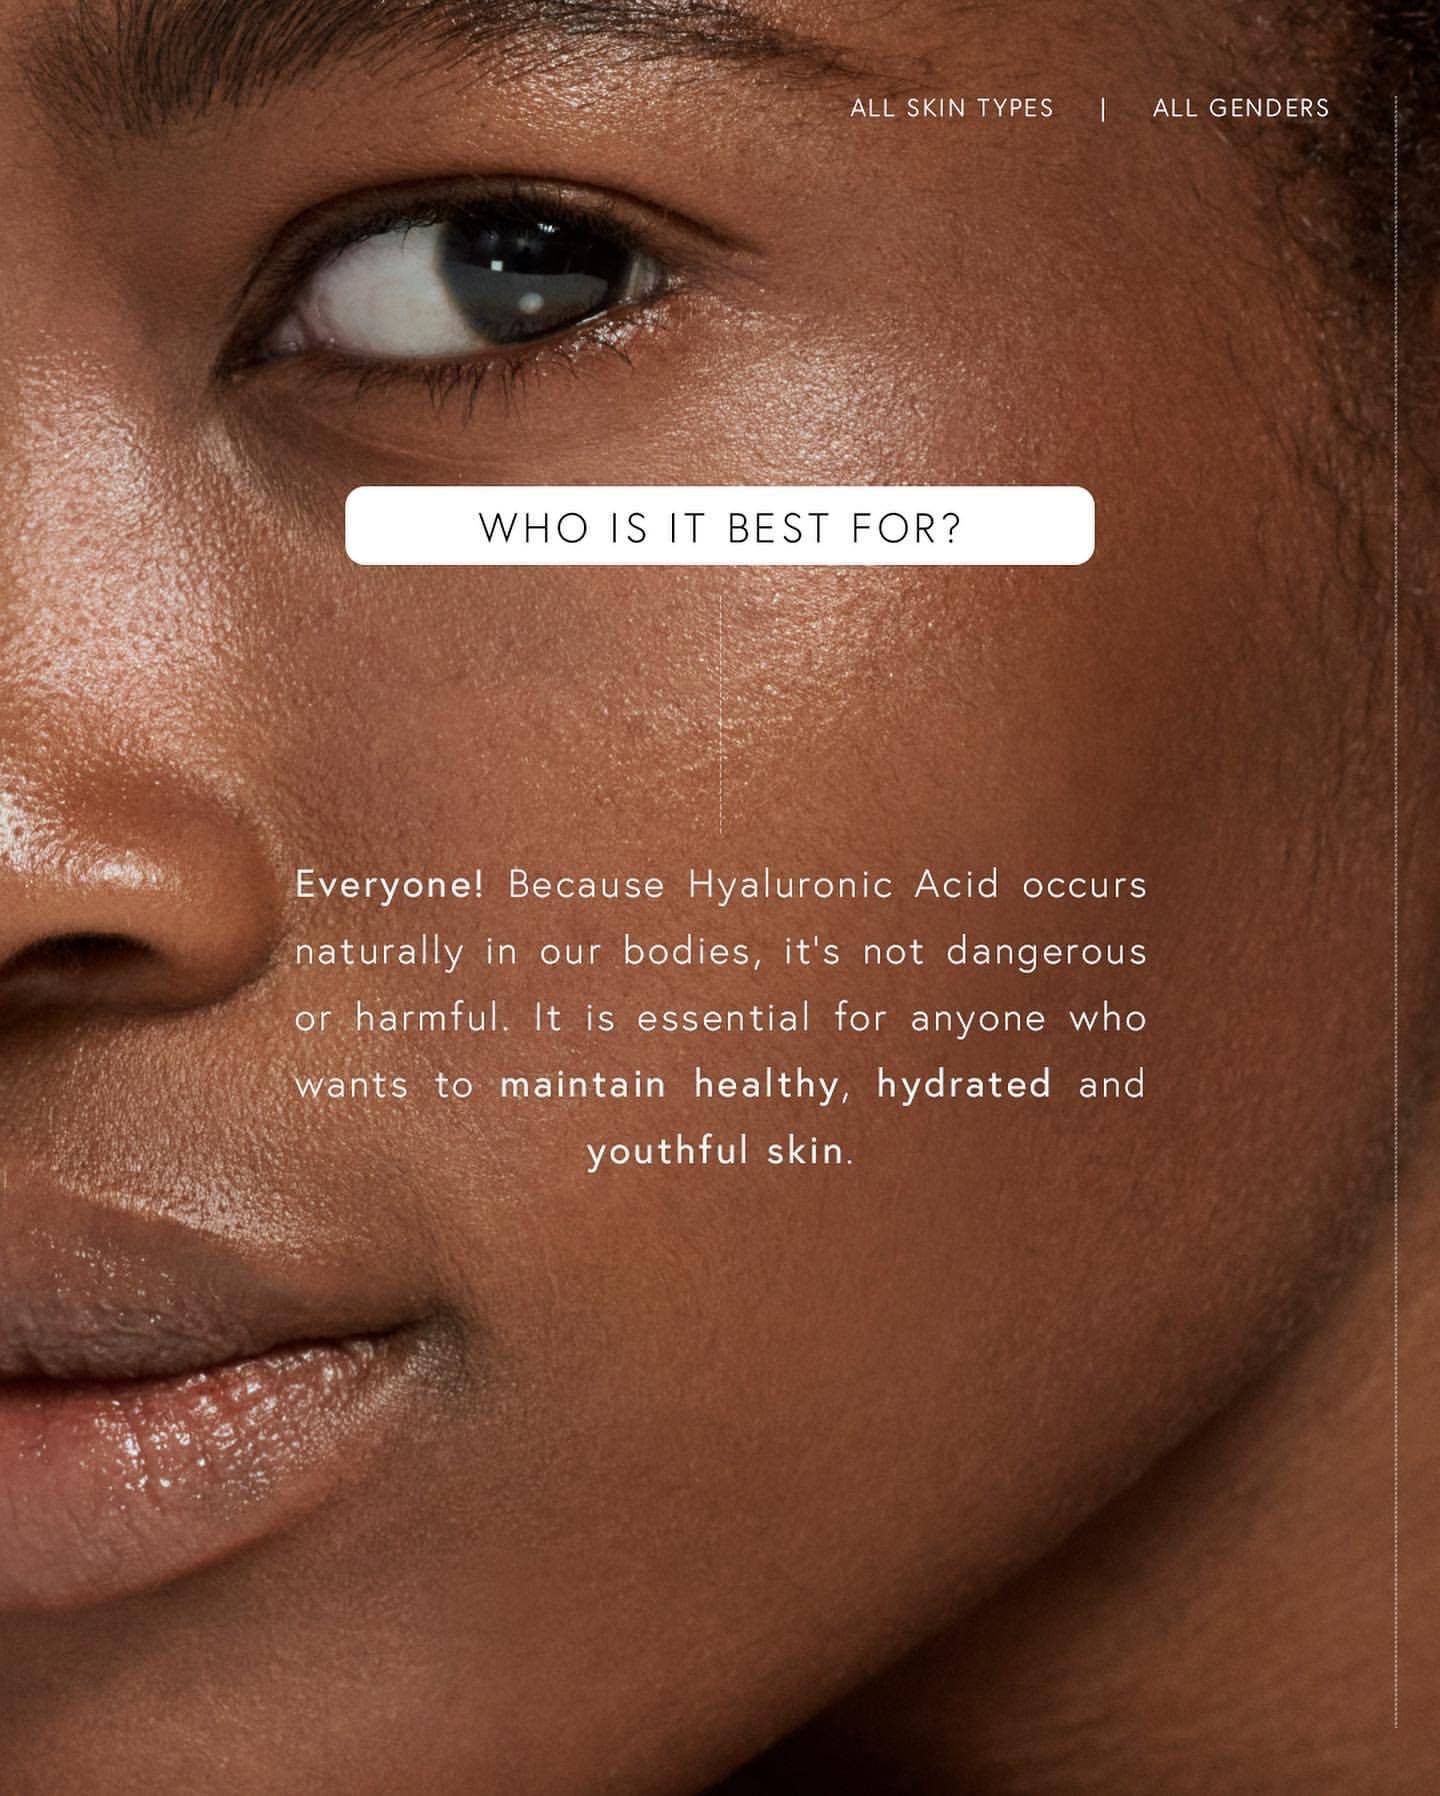 who is hyaluronic best for?